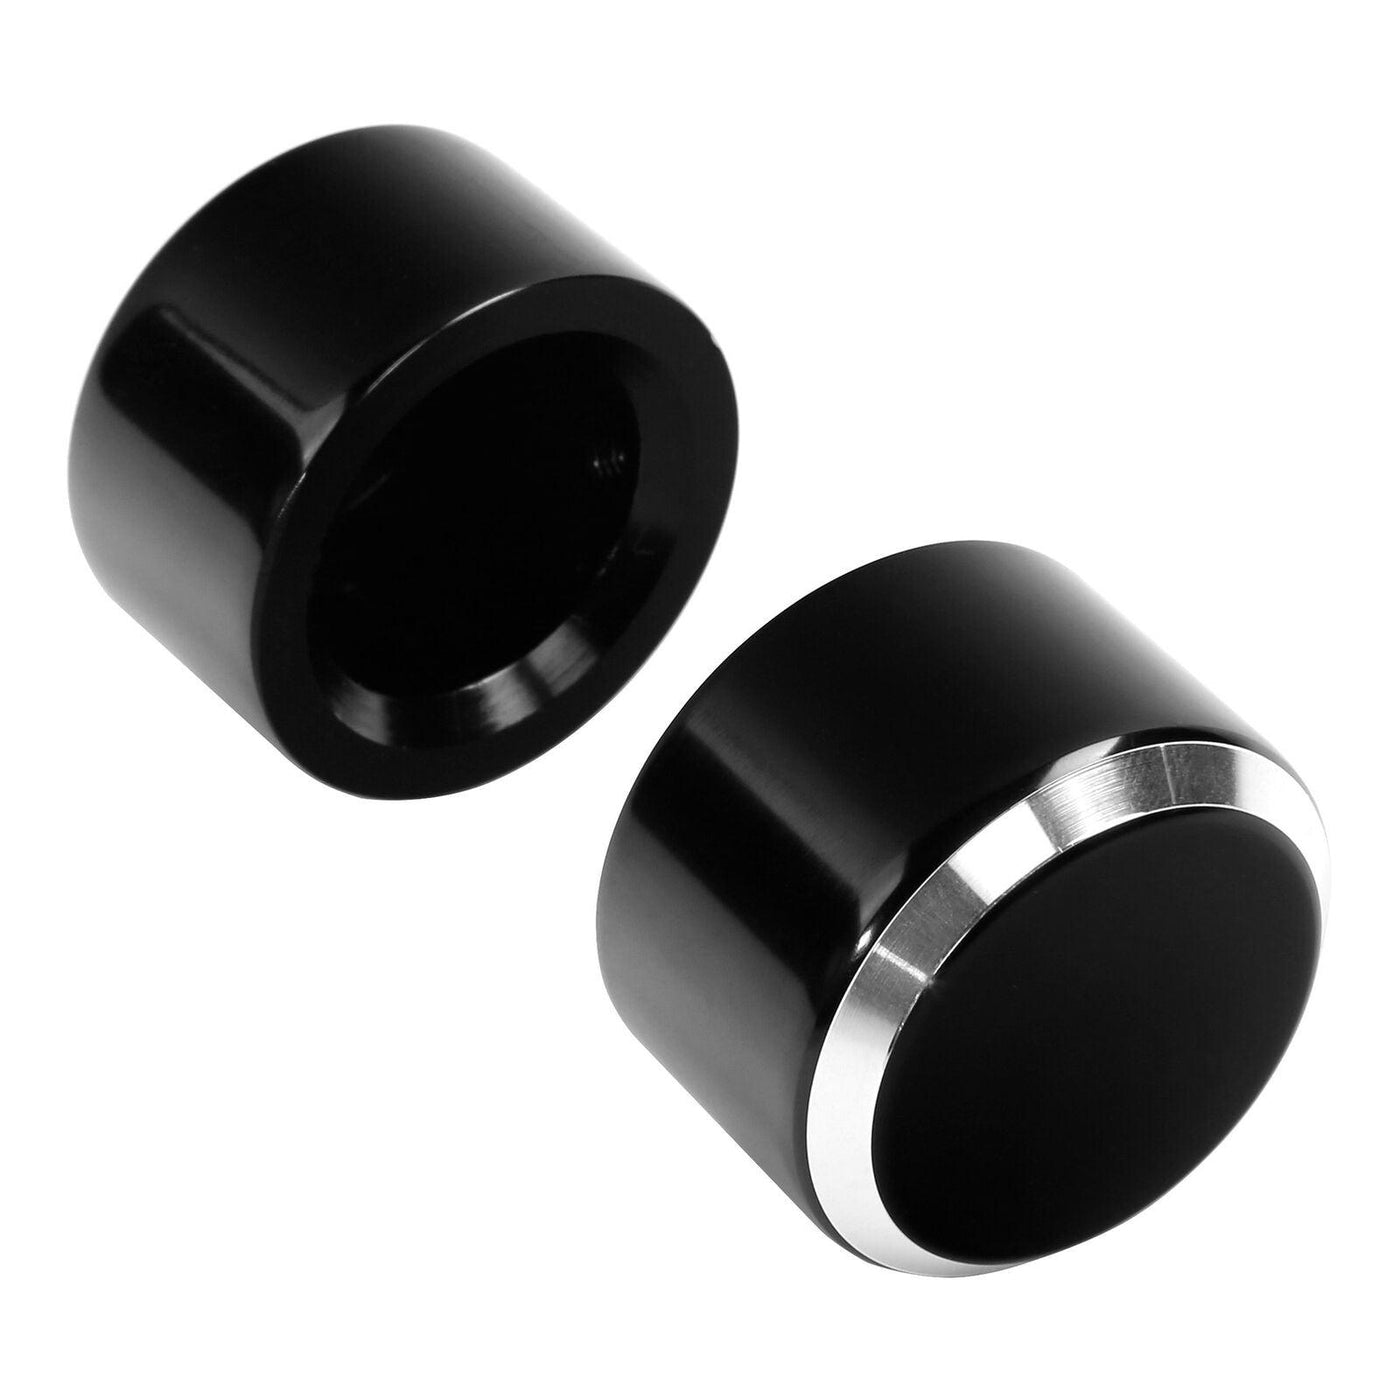 Gloss Black Front Axle Nut Covers Bolt Kit Fit For Harley Touring Street Glide - Moto Life Products